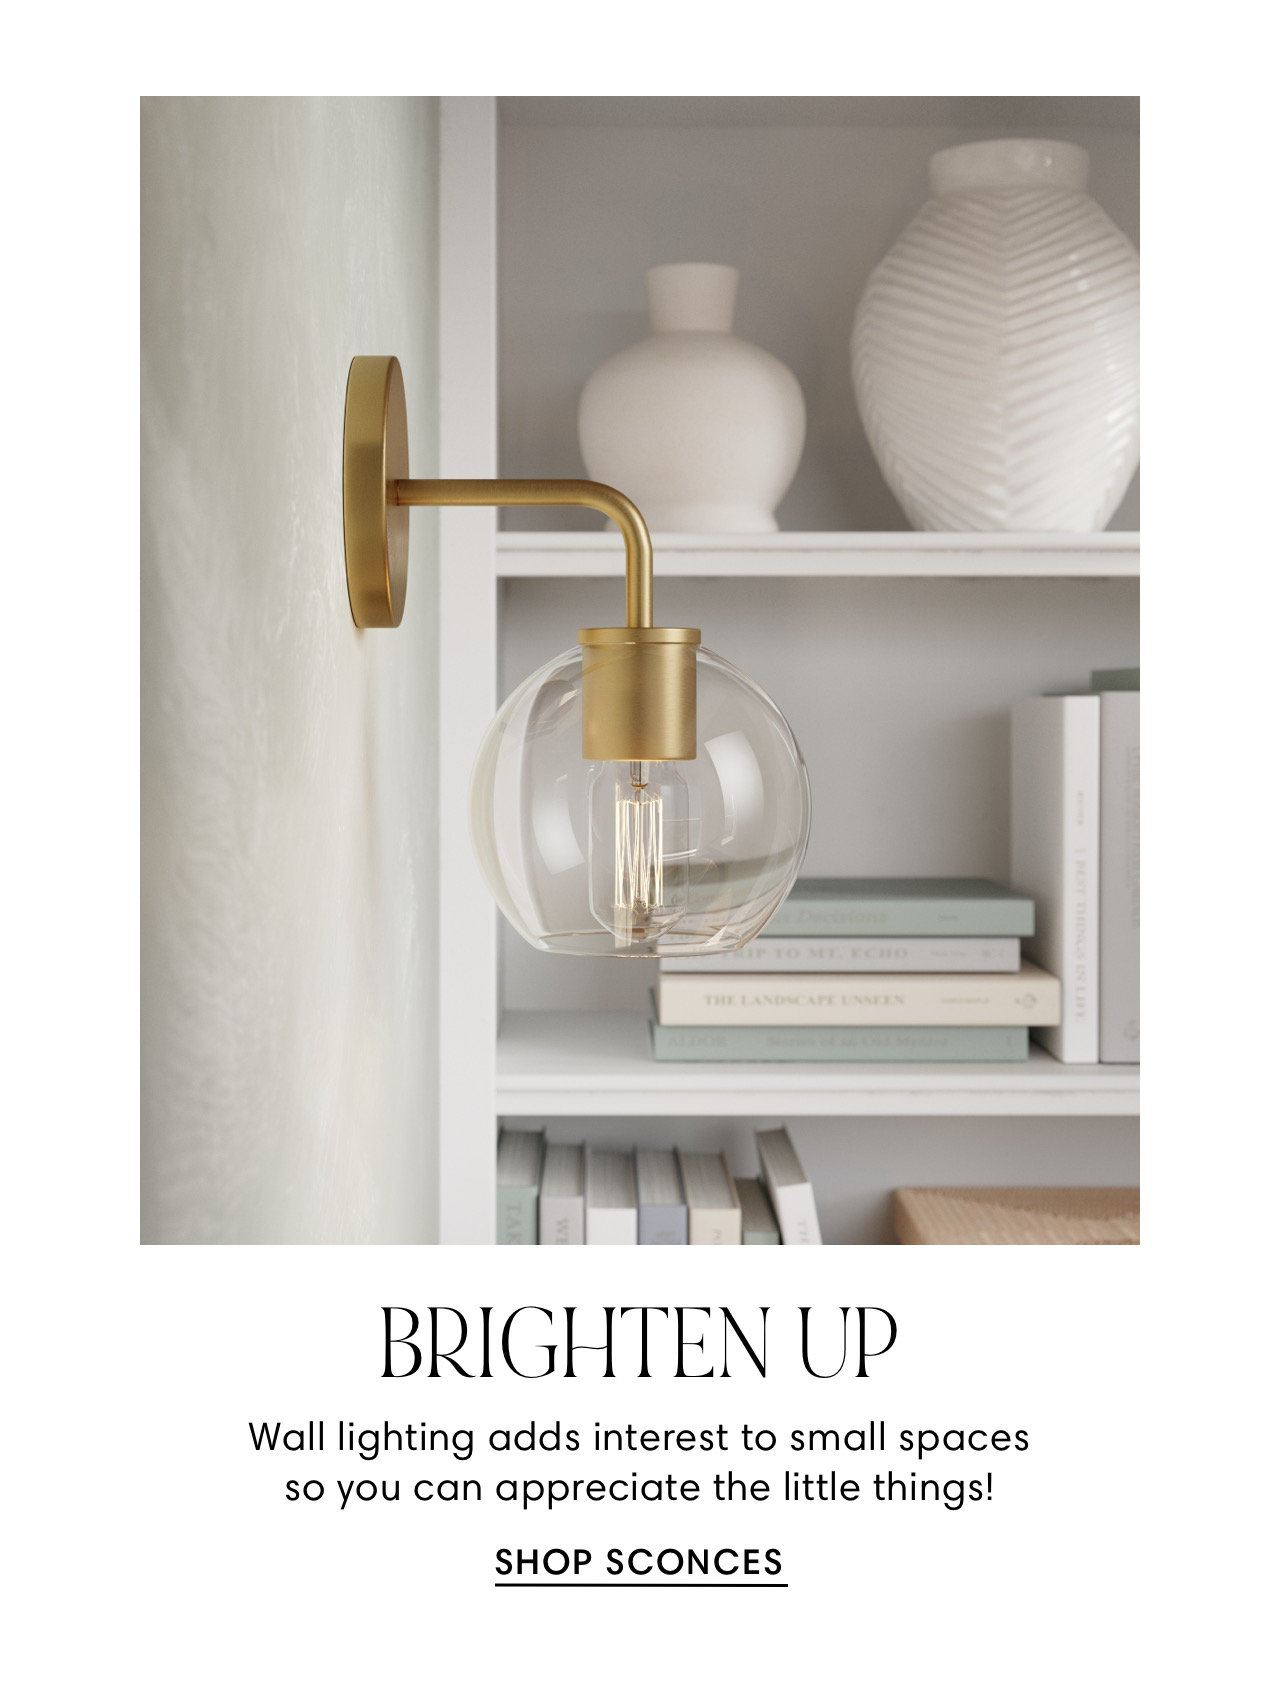  BRIGHTEN UP Wall lighting adds interest to small spaces so you can appreciate the little things! SHOP SCONCES 